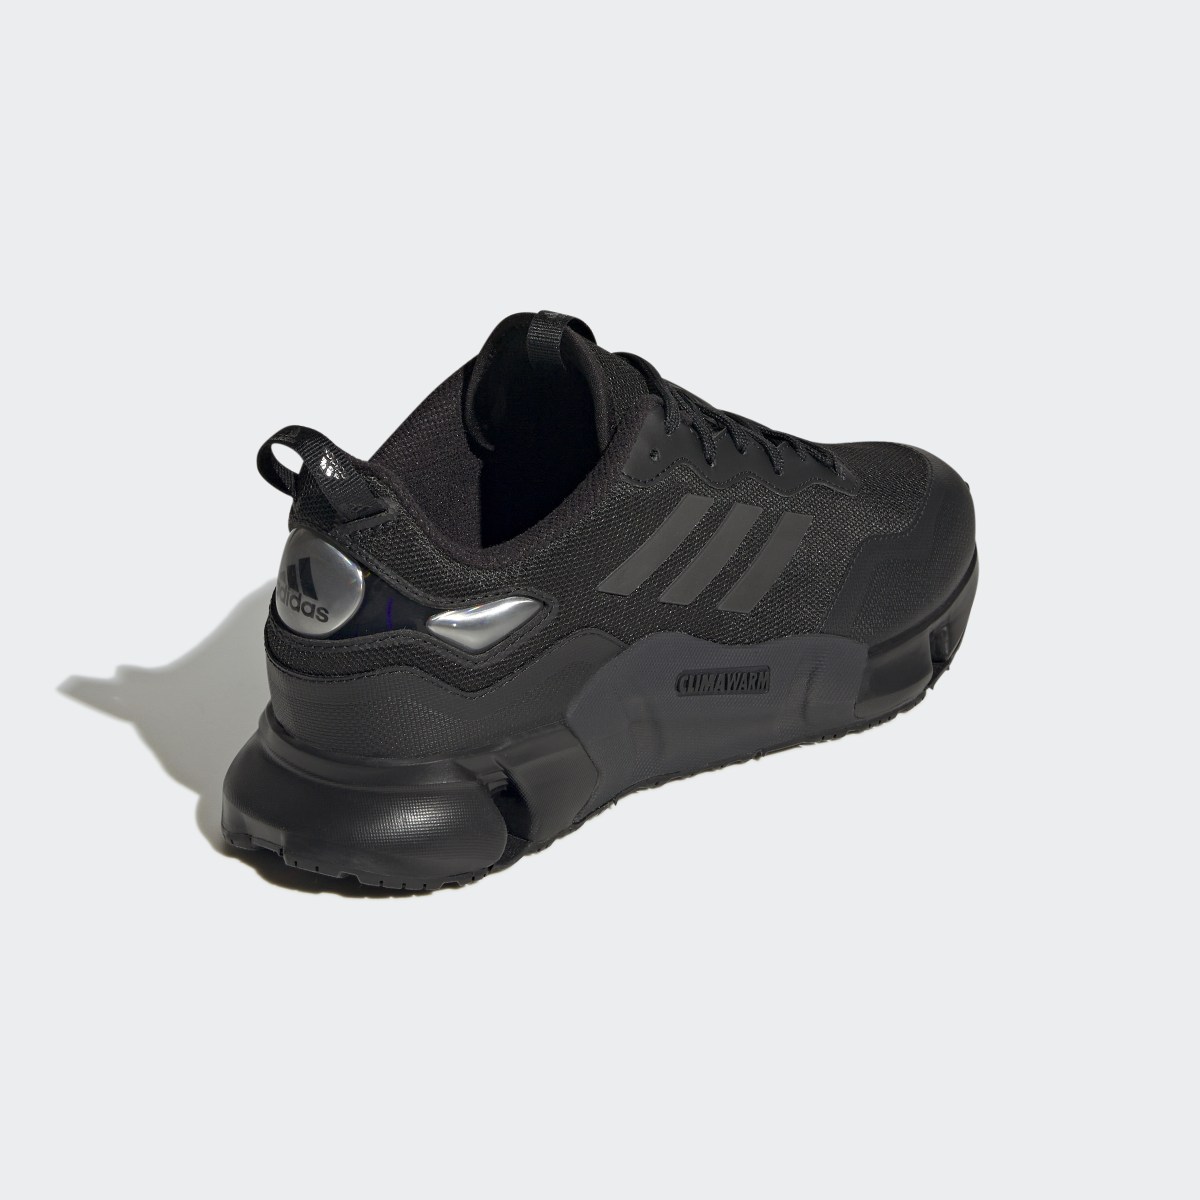 Adidas Climawarm Shoes. 9